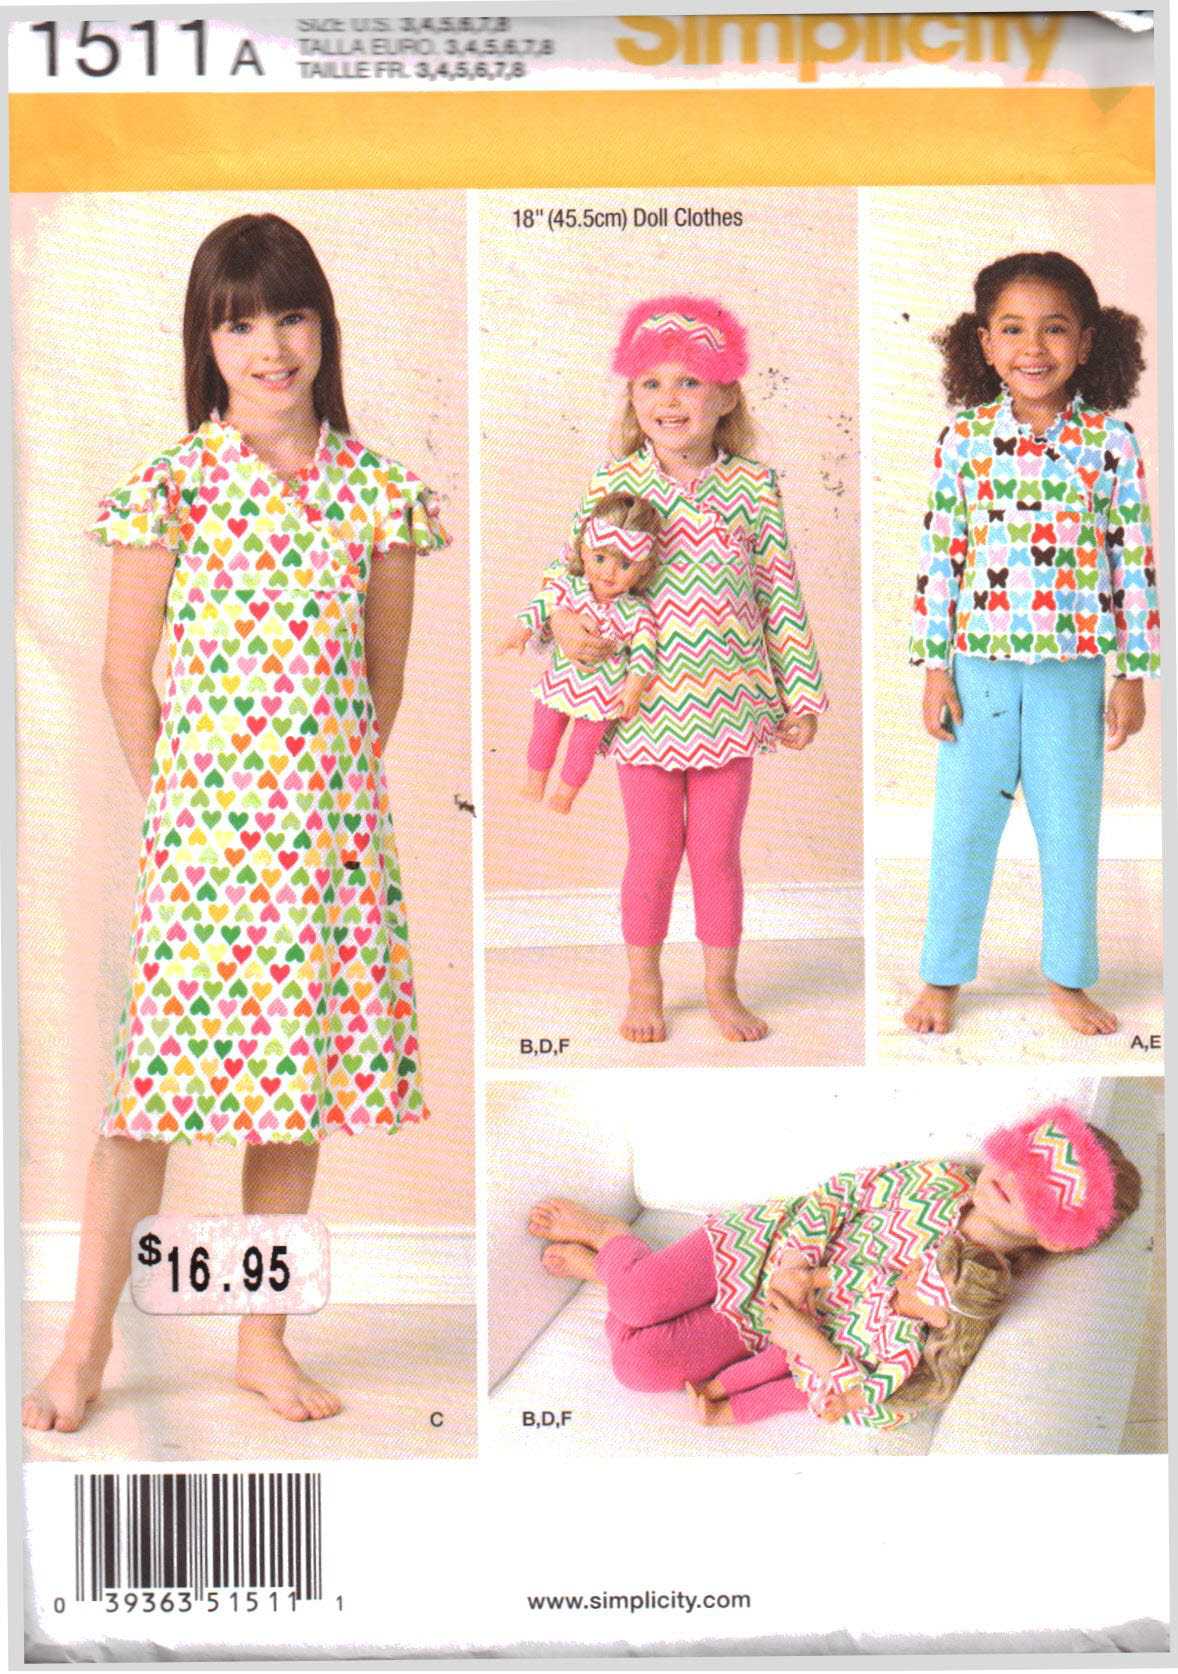 Simplicity 1511 Girls' Top, Tunic, Dress, Pants, Leggings, Eye Mask, and  18 Doll matching clothes Size: A 3-4-5-6-7-8 Uncut Sewing Pattern